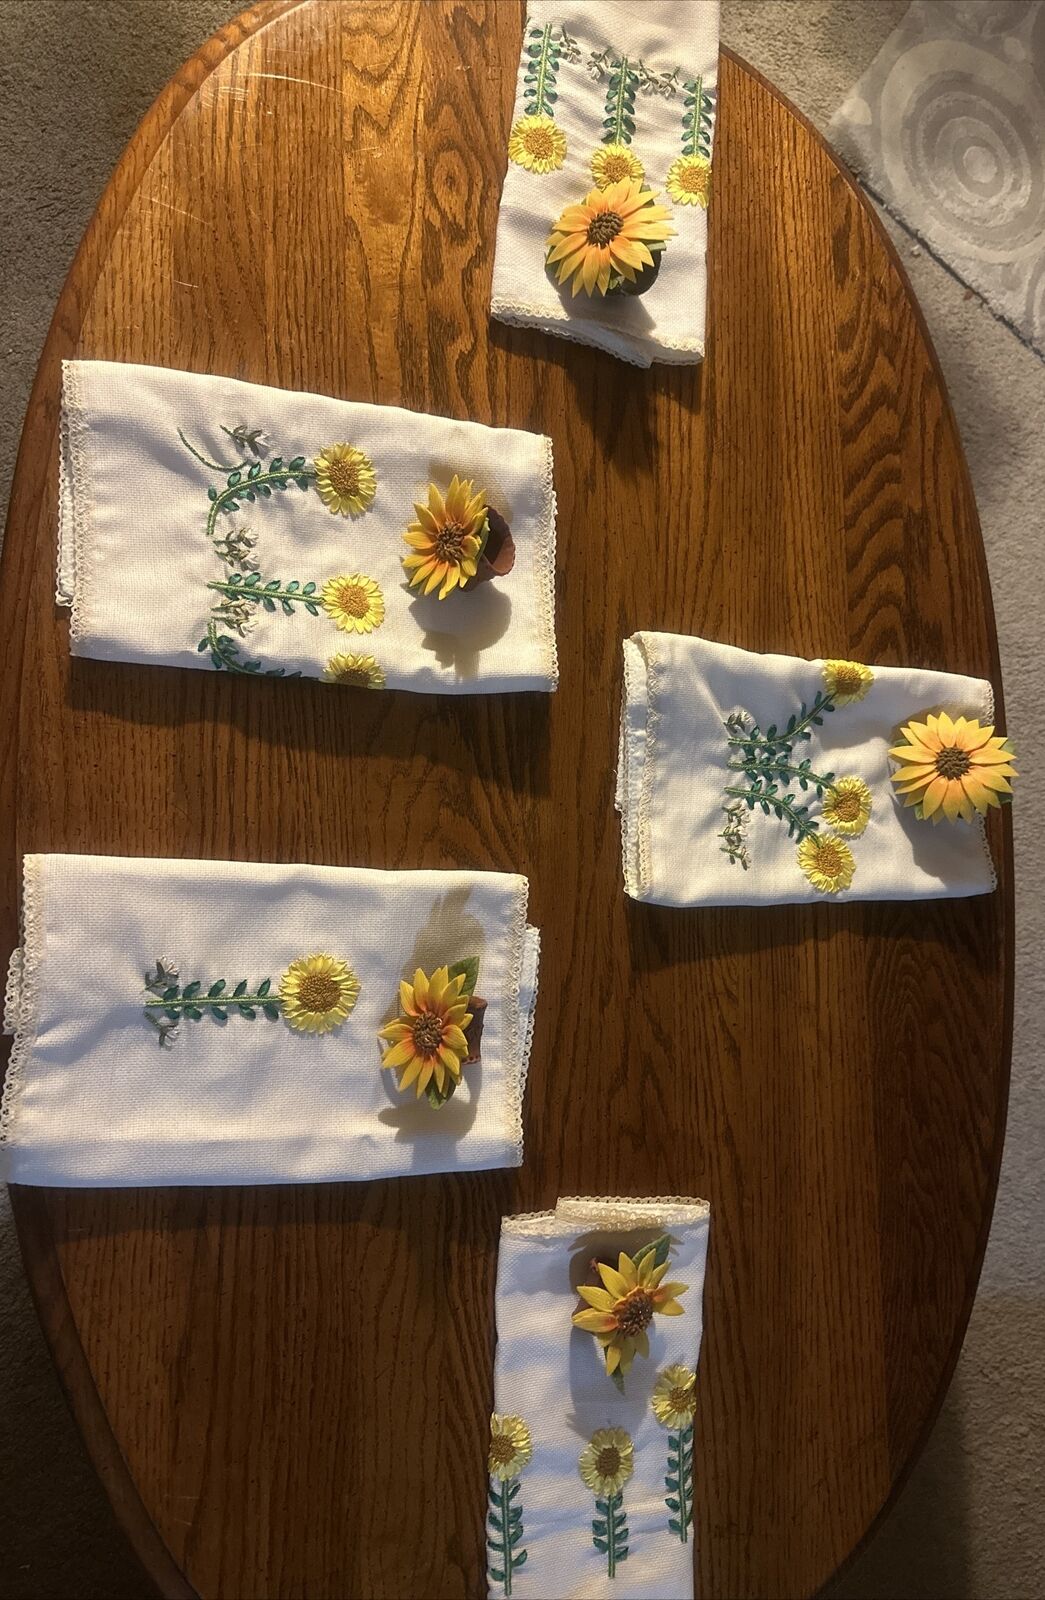 Set of 5 Embroidered Sunflower Cloth Napkins With 5 Sunflower Hand Made Holders